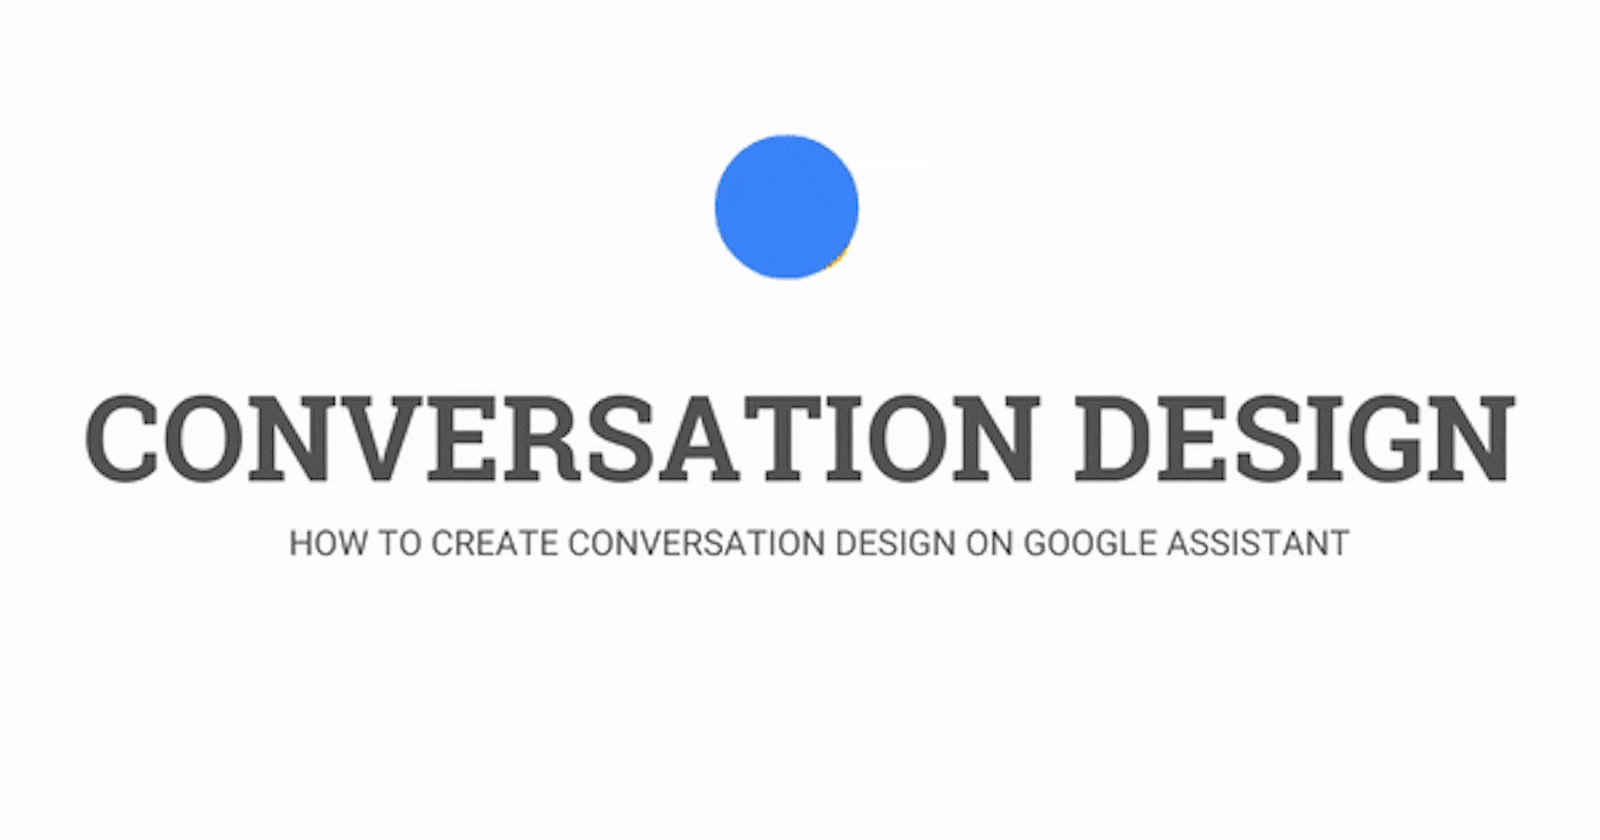 Designing Quality Conversation for Google Assistant